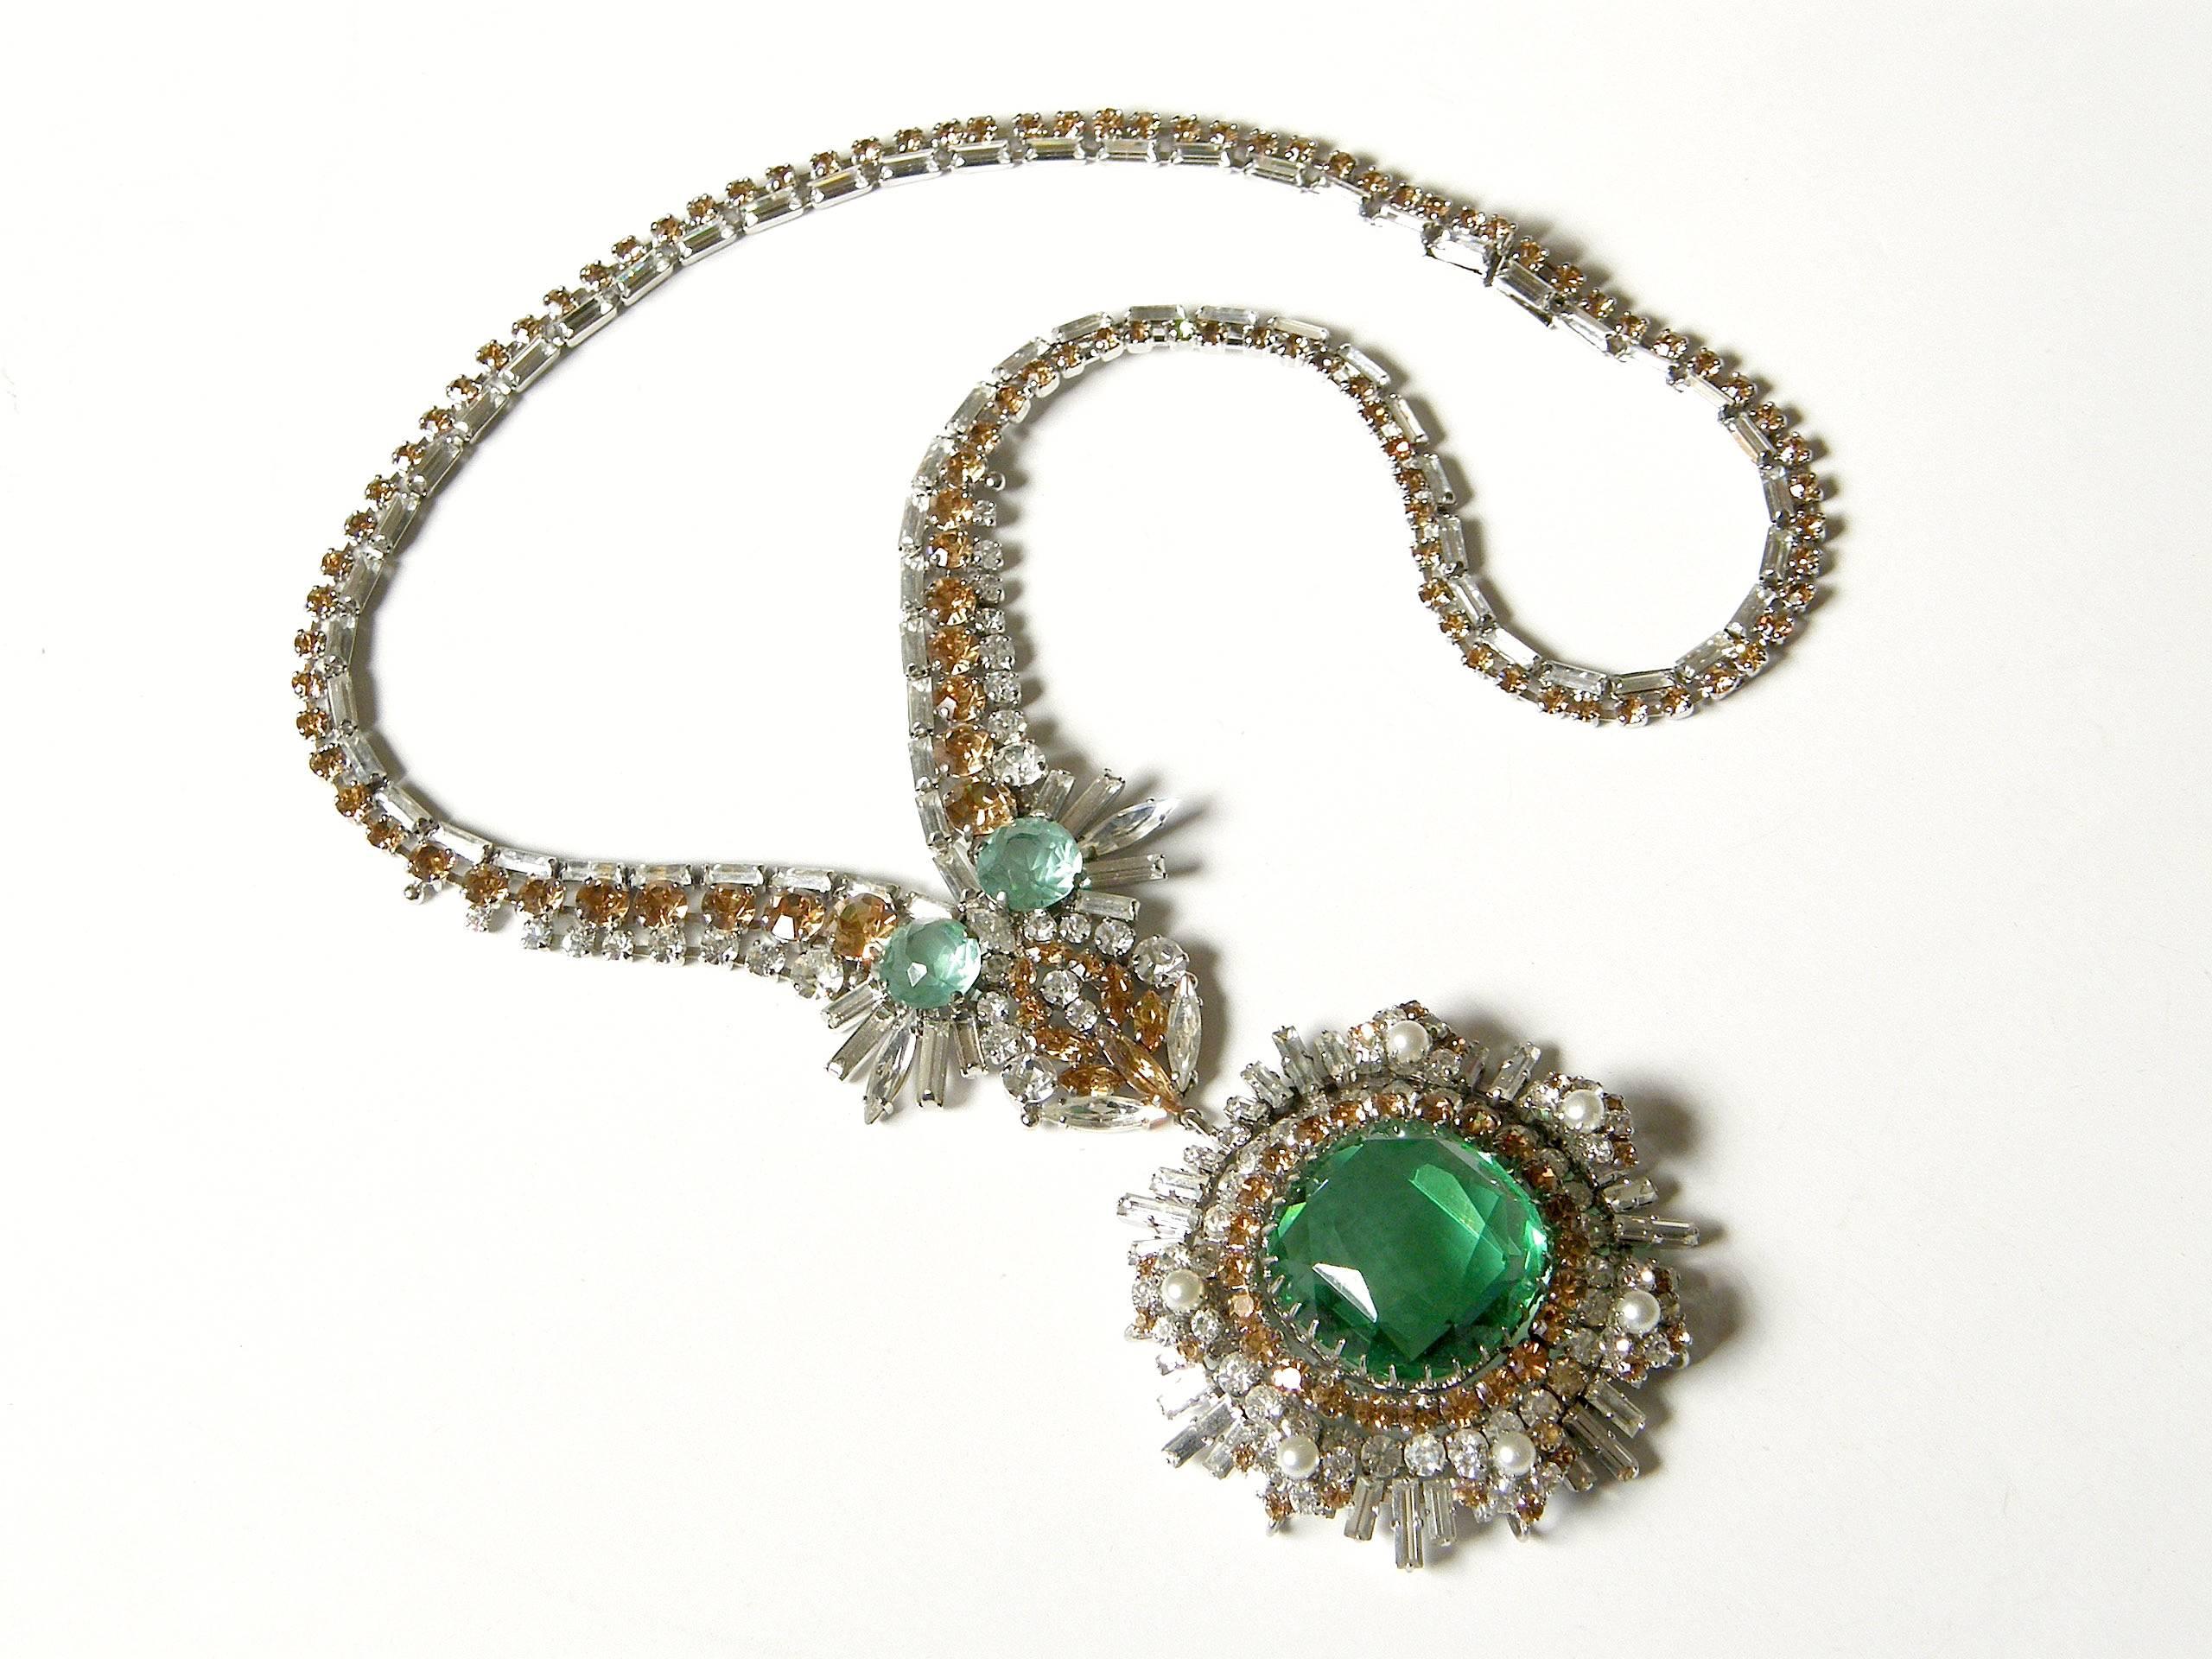 This exceptional rhinestone necklace features a huge, light green faux emerald 